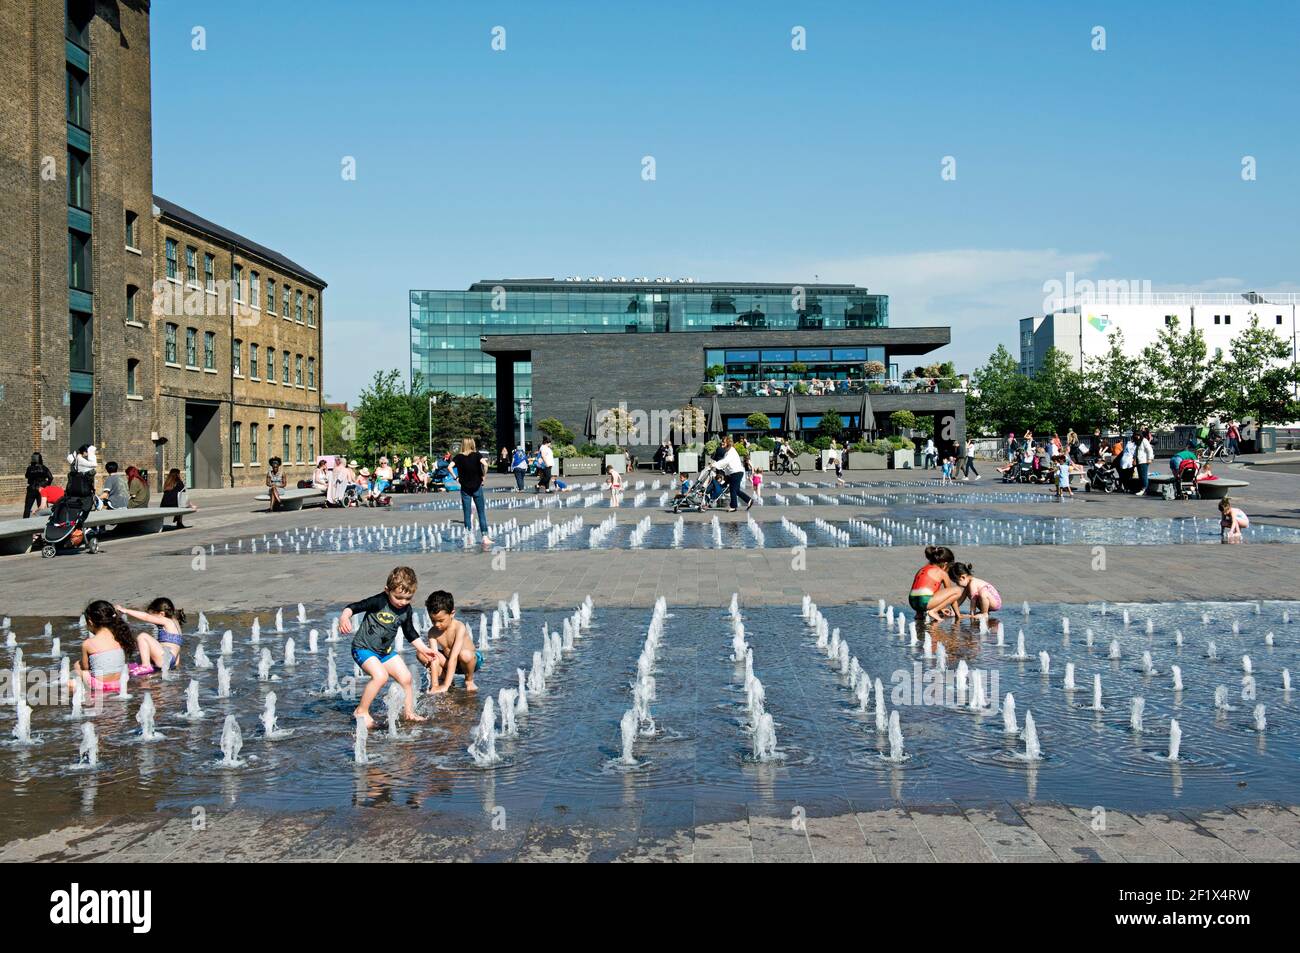 Children playing in water fountains, Granary Square, Kings Cross Stock Photo